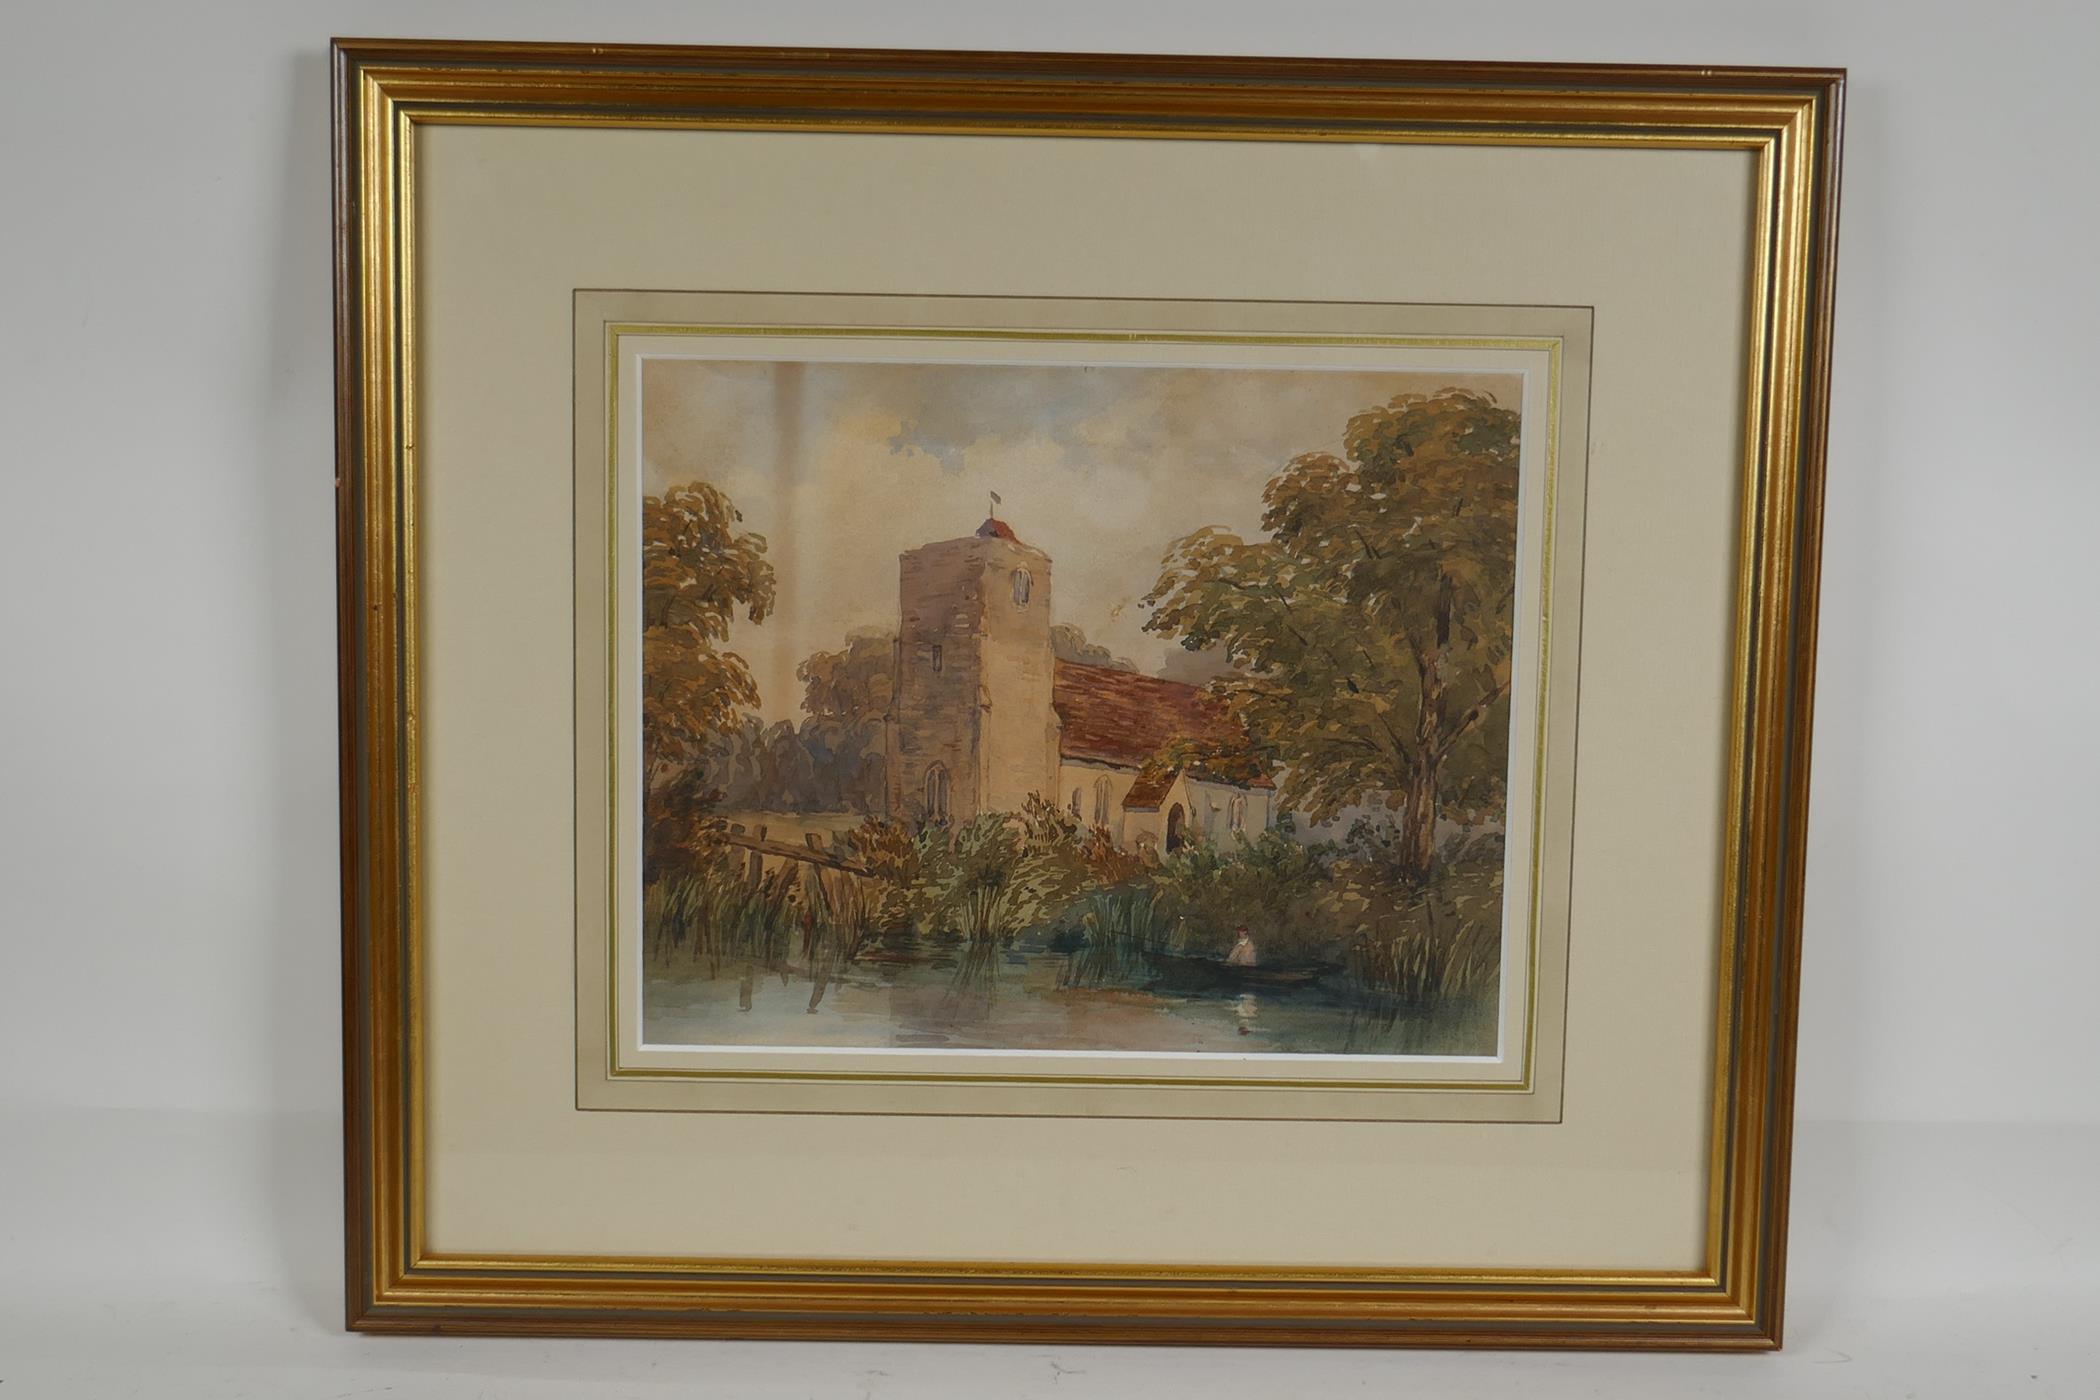 A rural scene with church and pond, C19th watercolour, 10" x 8" - Image 3 of 3